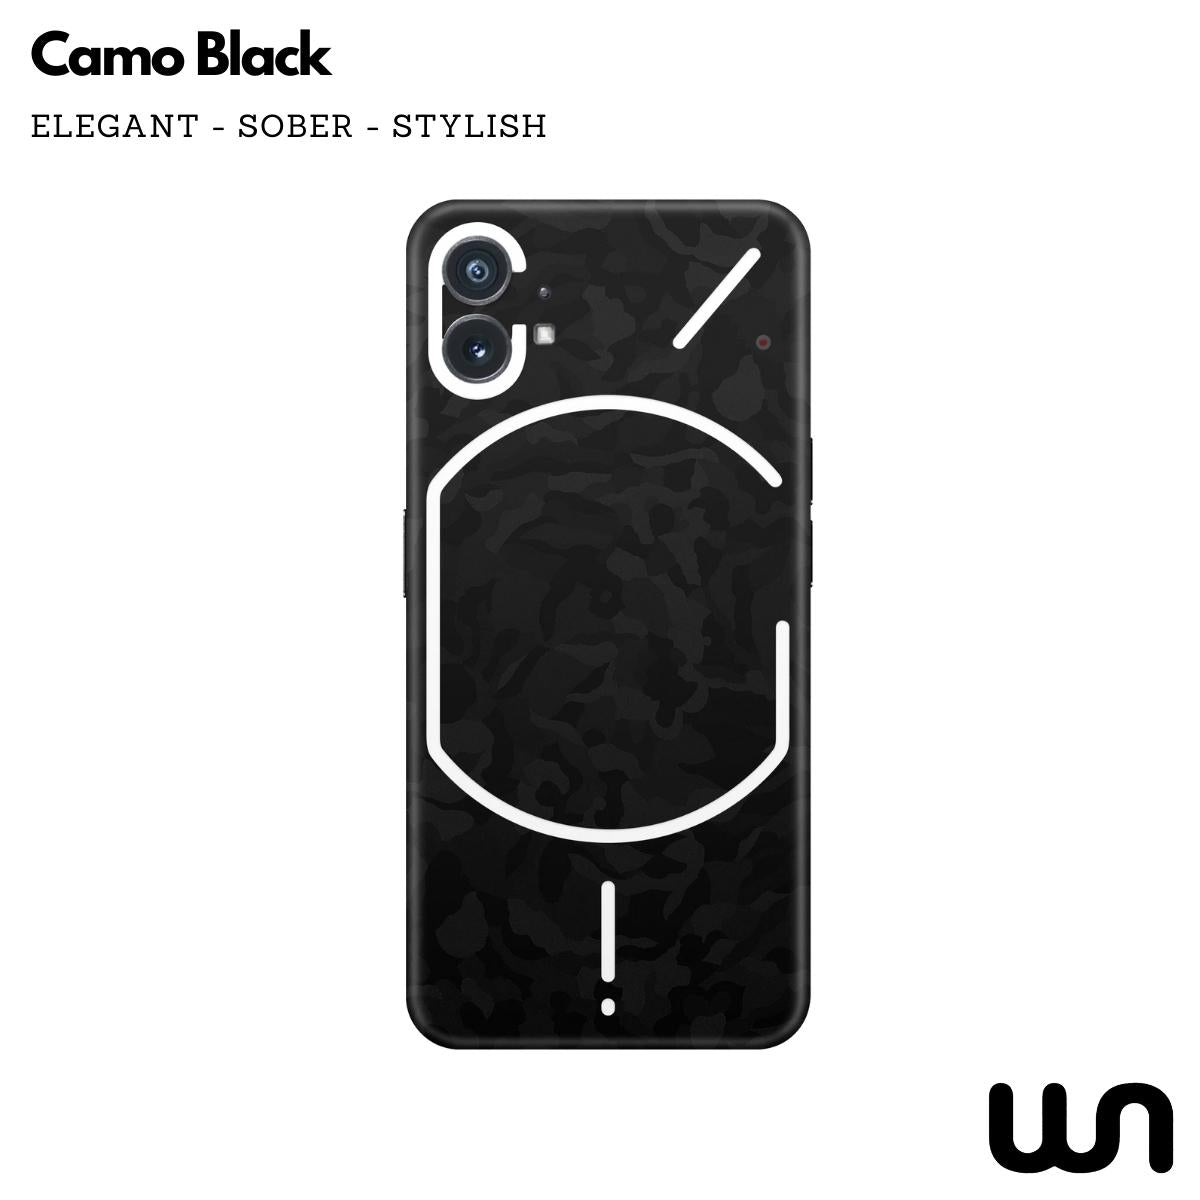 Camo Black Skin for Nothing Phone 1